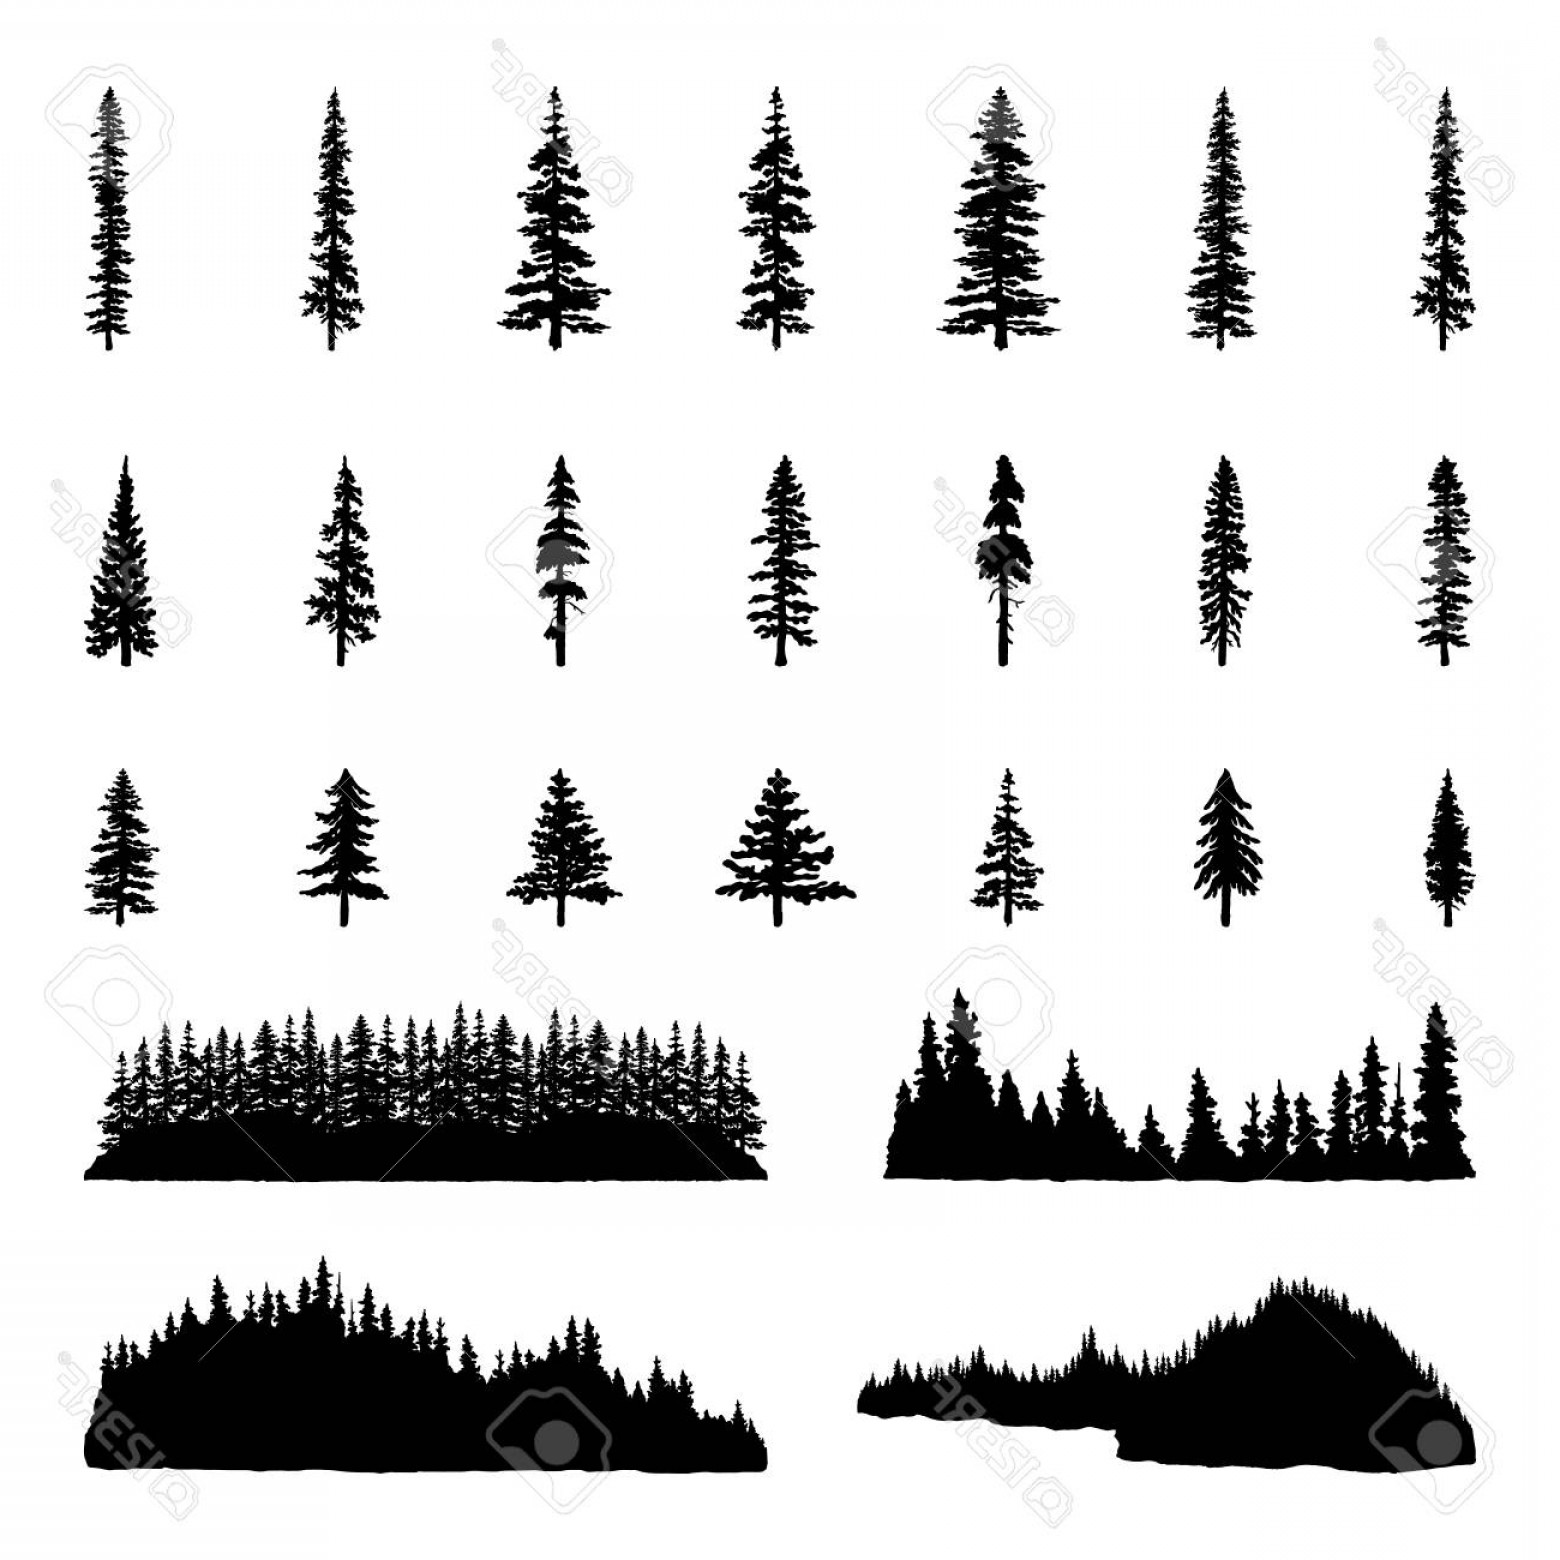 Download Forest Trees Silhouette Vector at Vectorified.com | Collection of Forest Trees Silhouette Vector ...